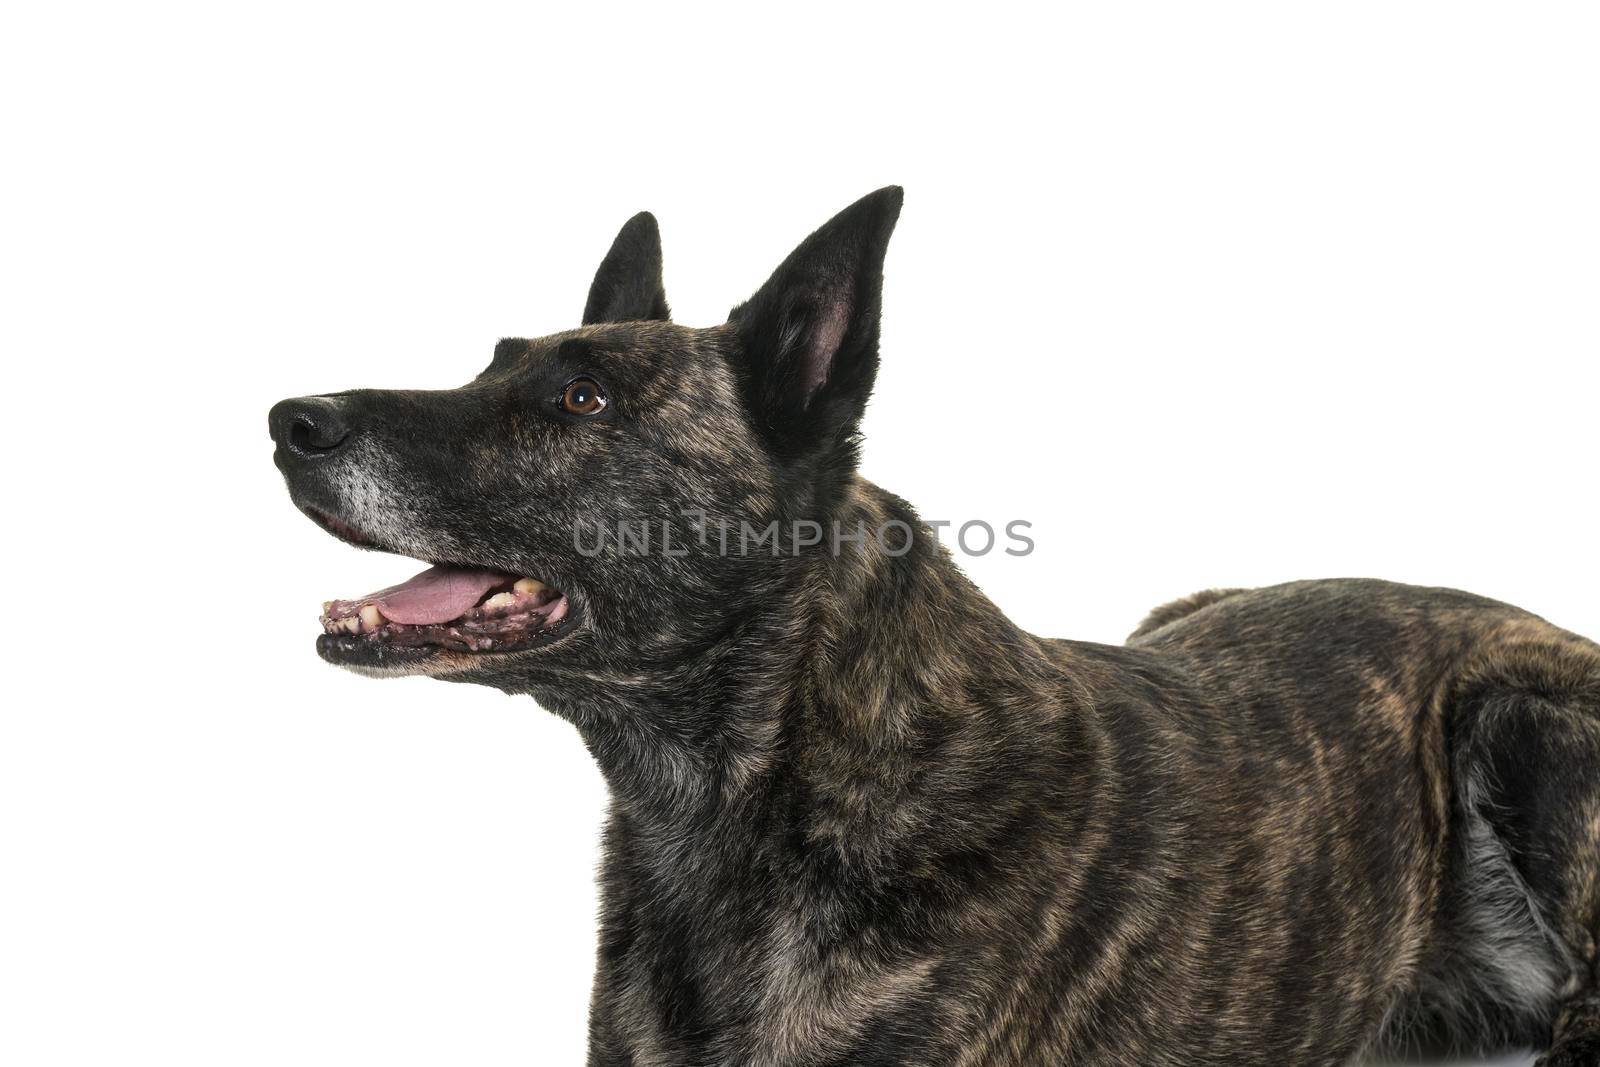 Portrait of the head of a Dutch Shepherd dog, brindle coloring, isolated on white background by LeoniekvanderVliet